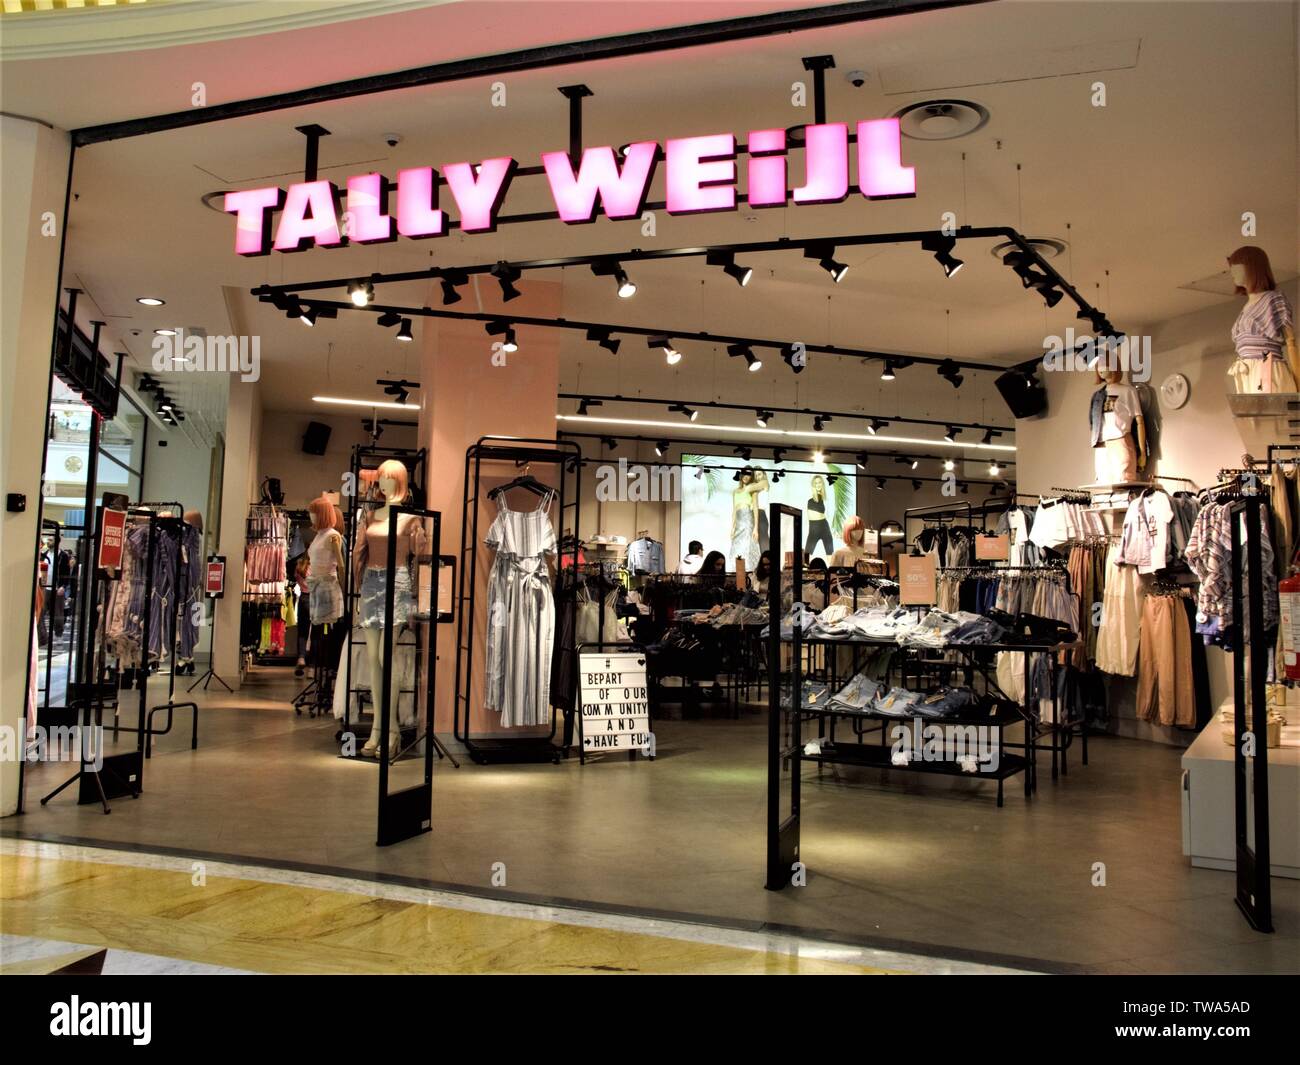 TALLY WEIJL FASHION STORE ENTRANCE IN EUROMA 2 SHOPPING CENTER IN